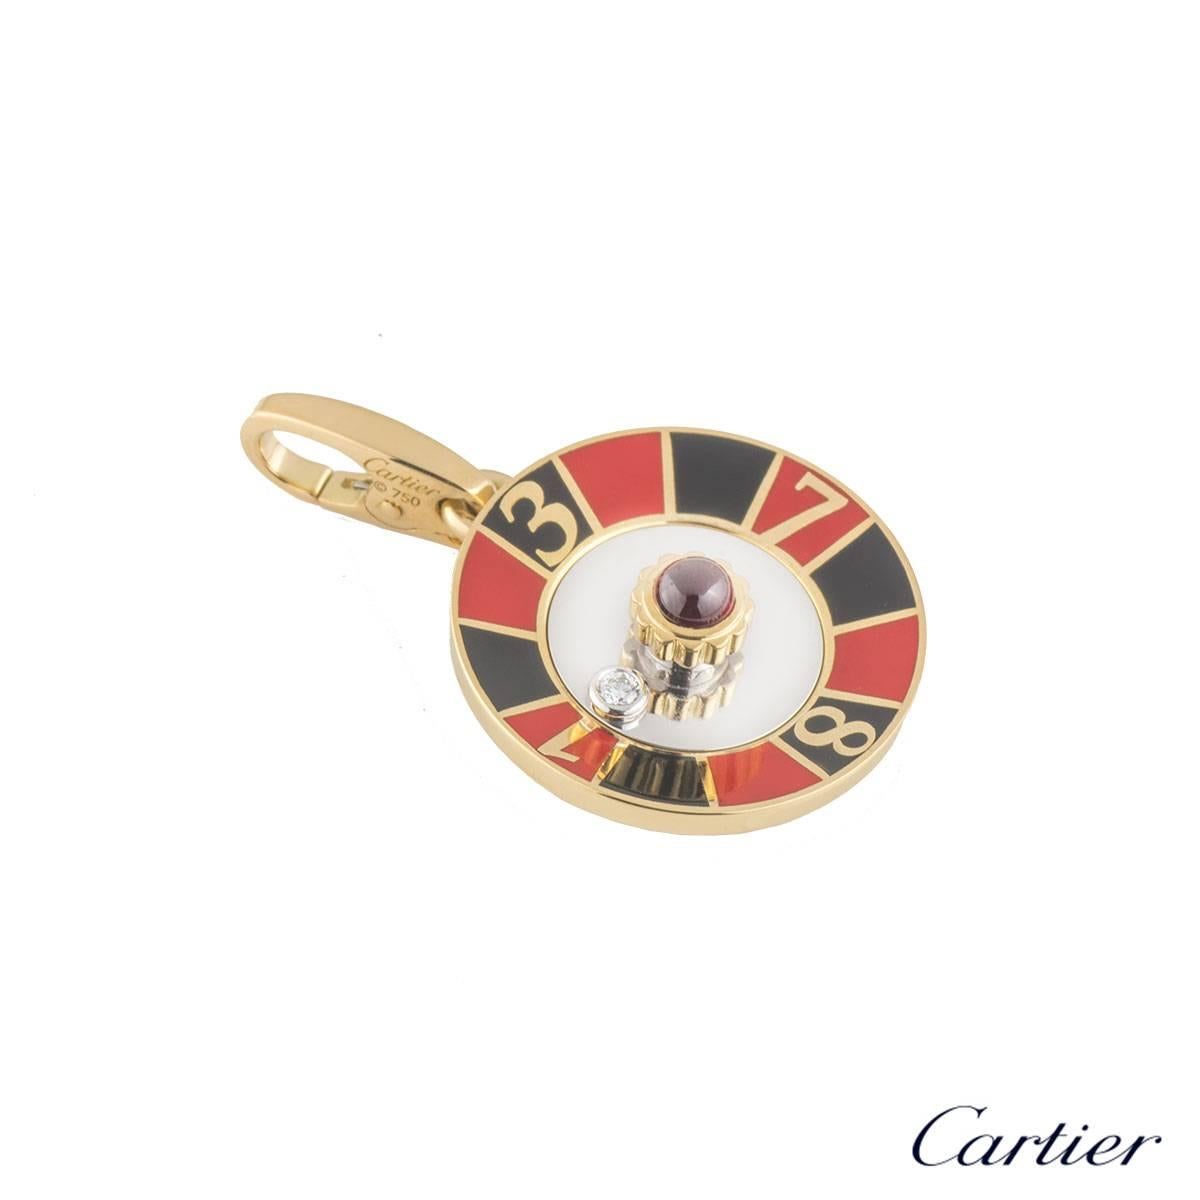 A unique 18k yellow gold Cartier charm. The charm comprises of a roulette motif with a cabachon ruby set to the centre. The charm is also complemented with a round brilliant cut diamond which freely moves in the centre. The charm features a lobster